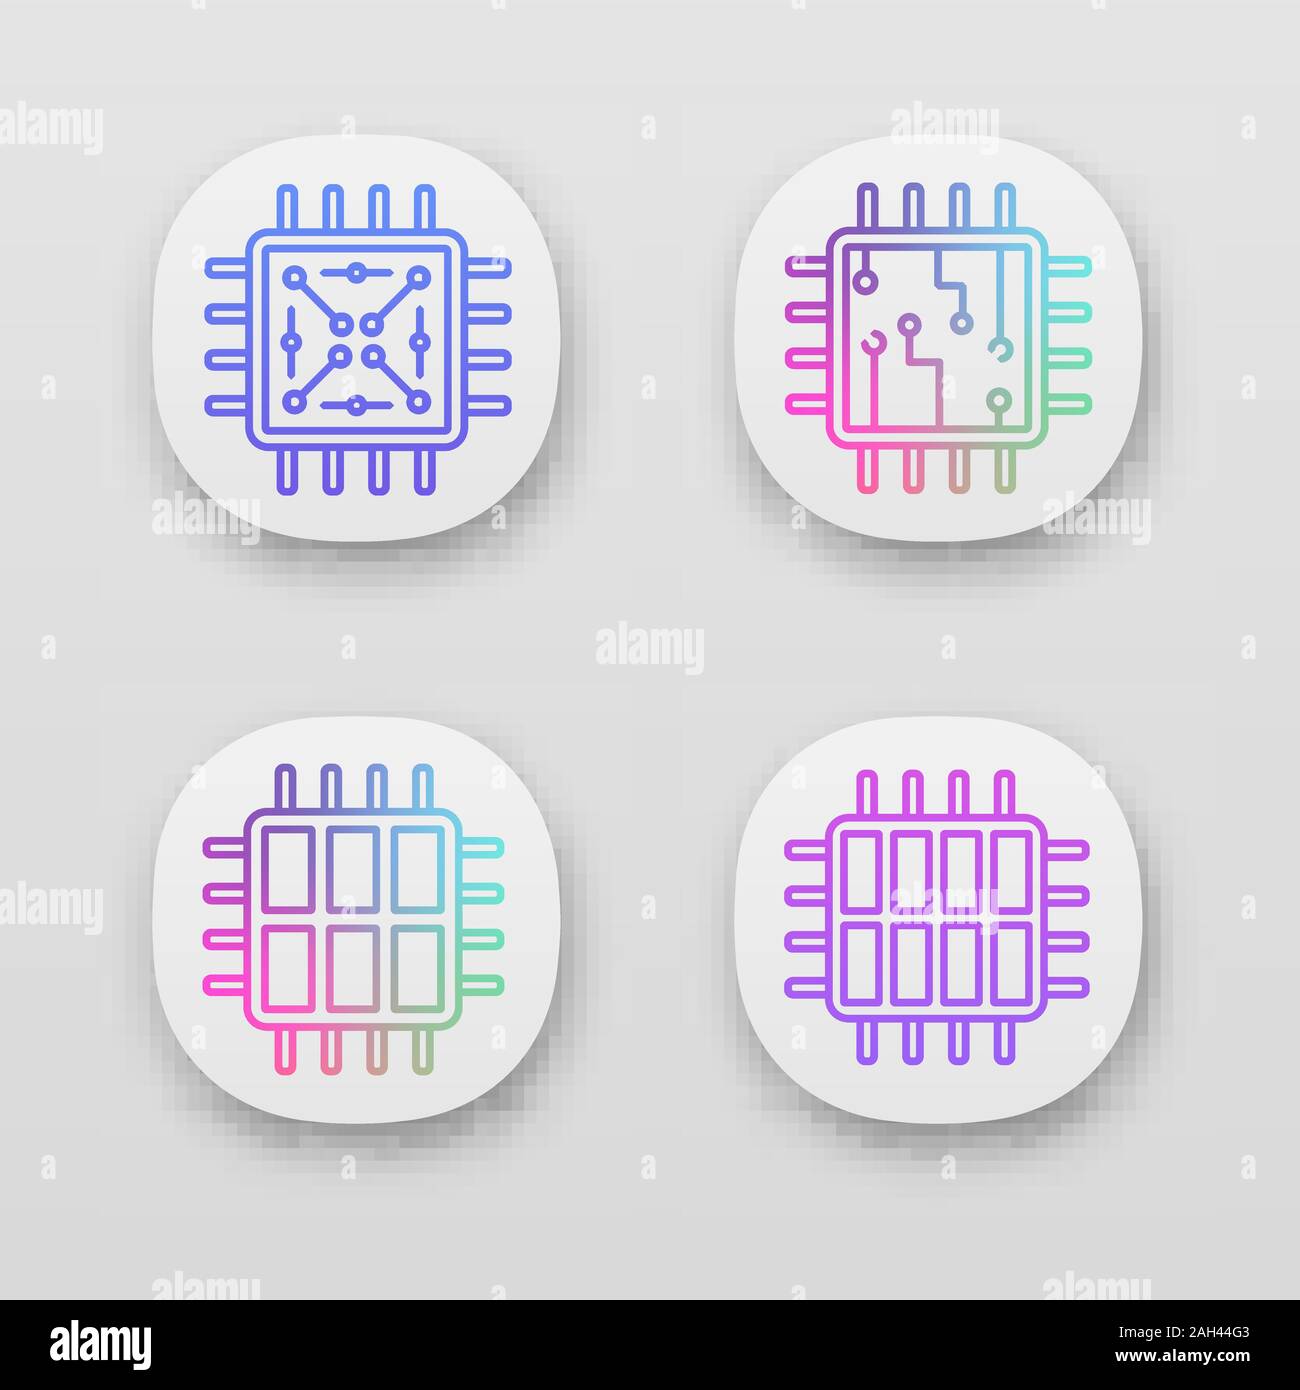 Processors app icons set. UI/UX user interface. Chip, microprocessor, integrated unit, six and octa core processors. Web or mobile applications. Vecto Stock Vector